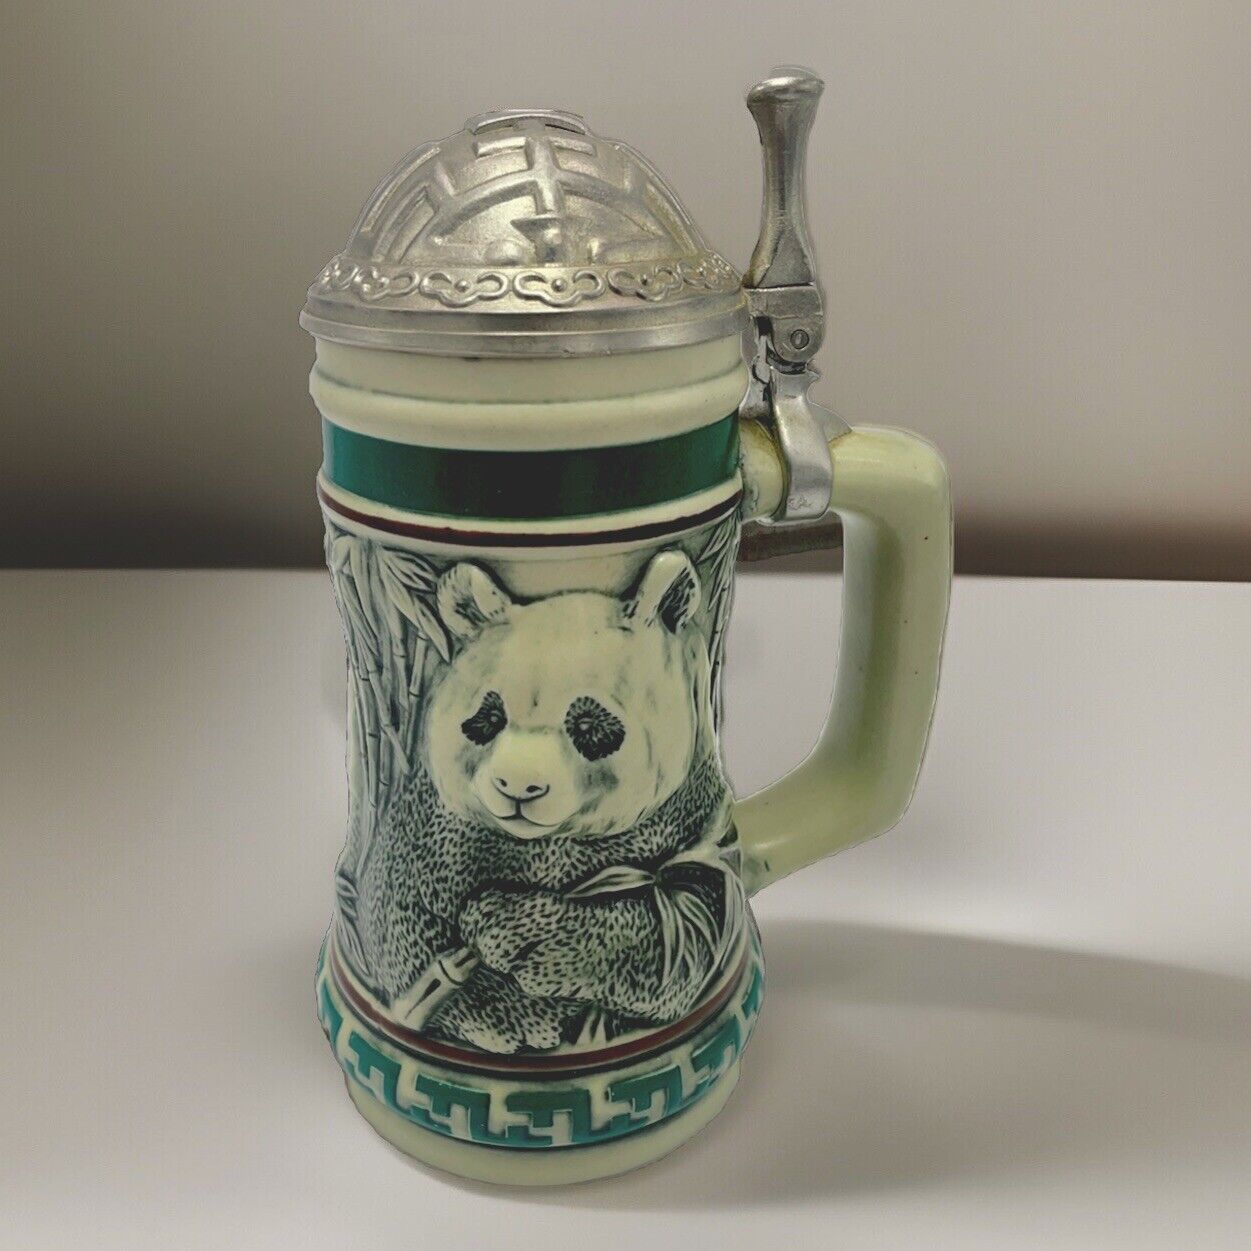 Avon Endangered Species Mini Stein The Giant Panda 6 zo Exclusively 1991 Cup C62